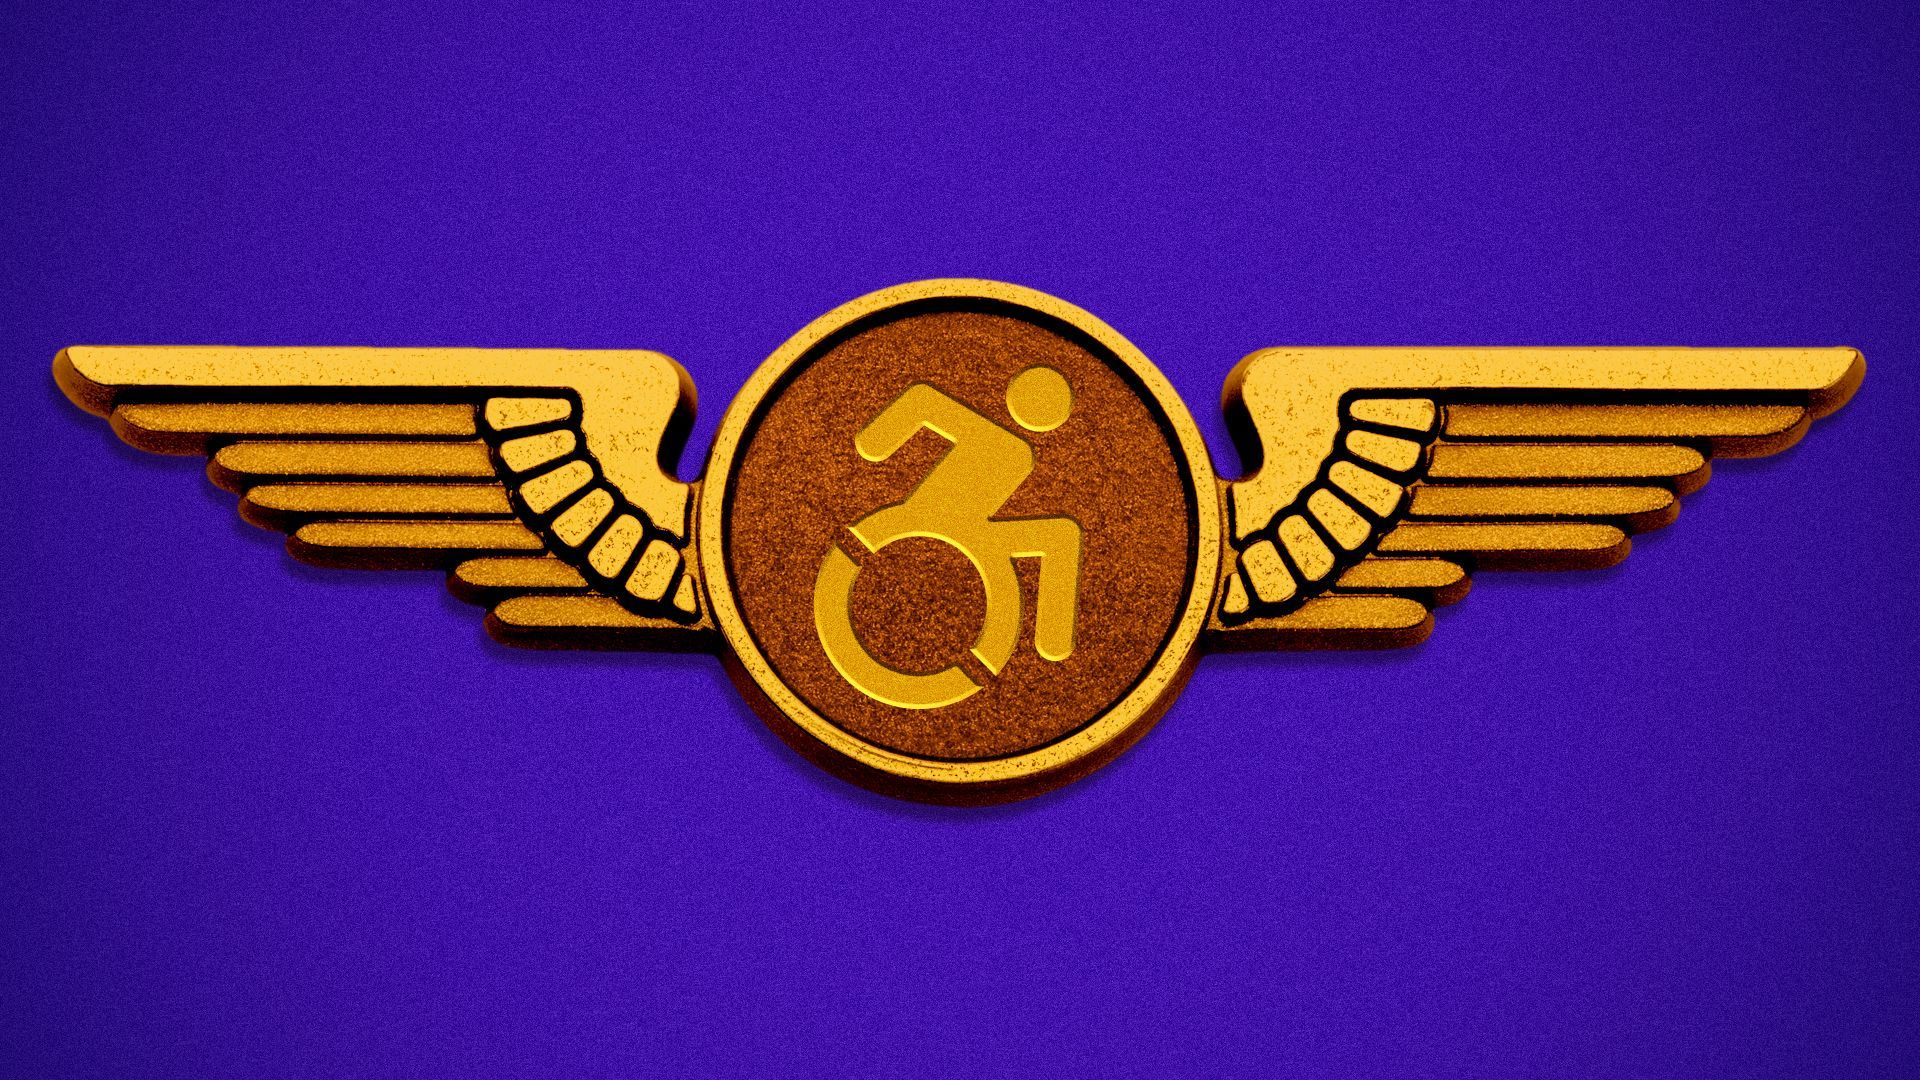 Illustration of a golden airplane wing pin engraved with the accessibility icon.